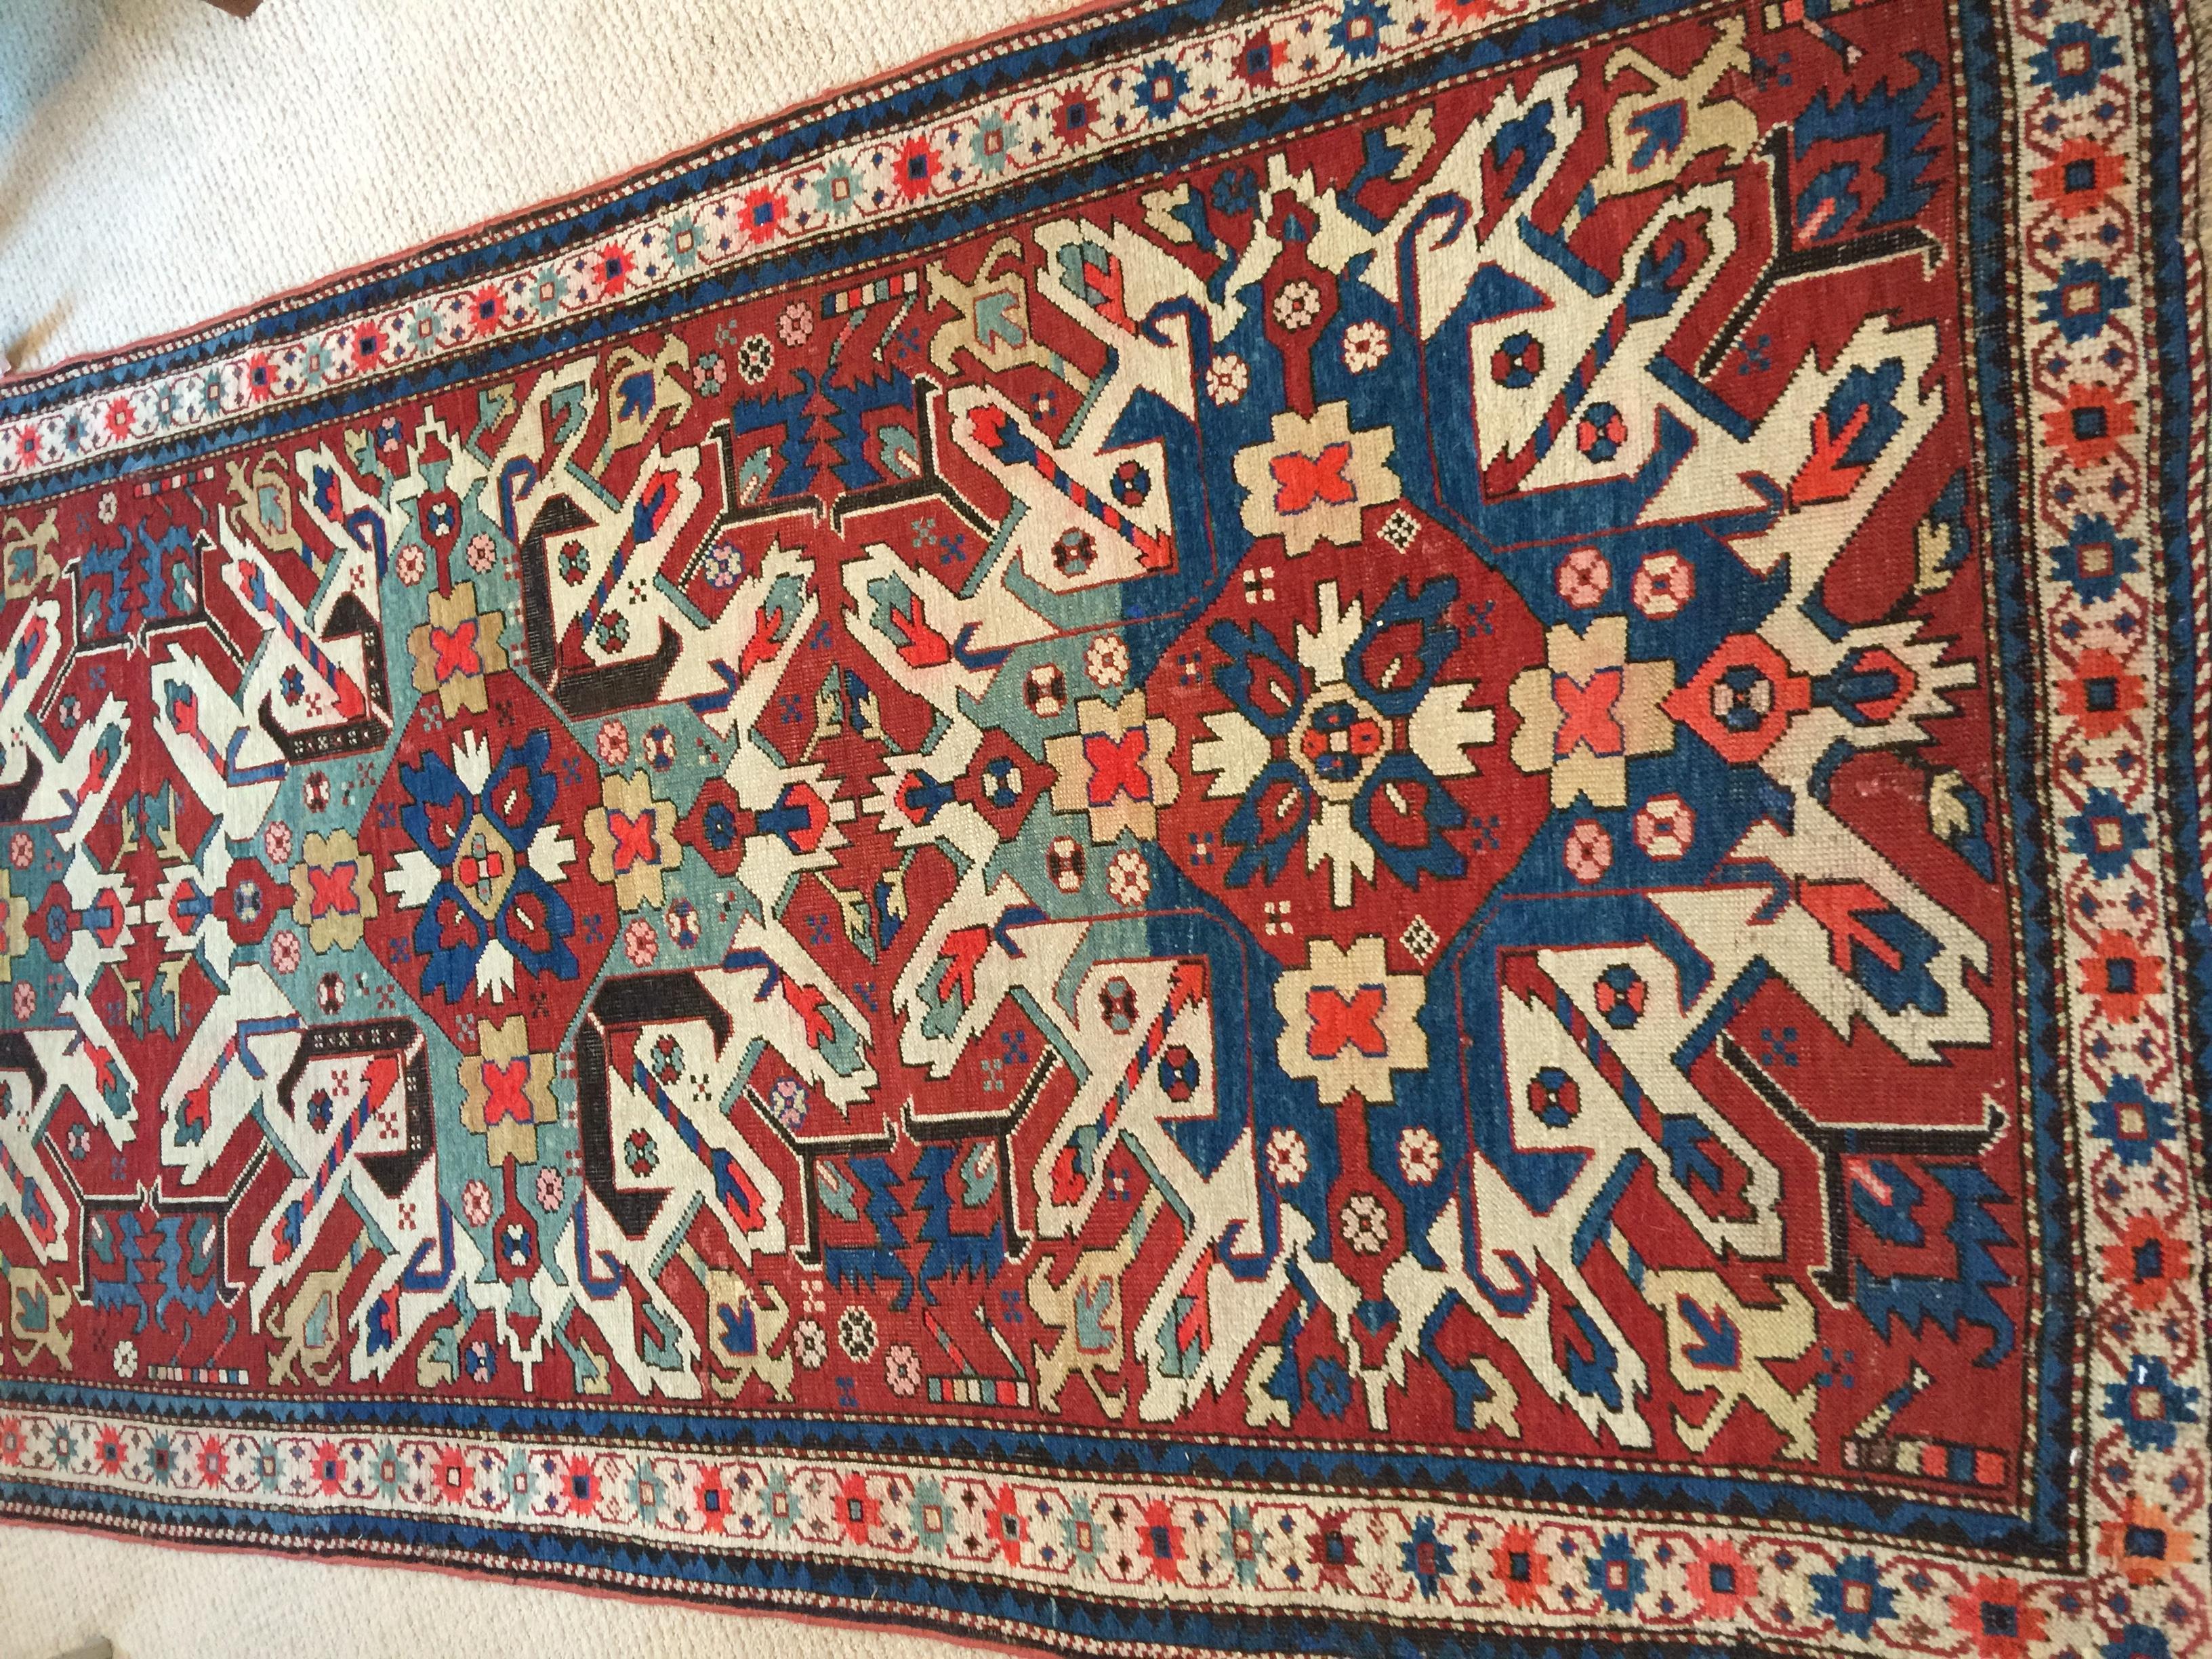 Beautiful late 19th century eagle Kazak Chelaberd wool carpet rug has wonderful colors and sunburst detailing. Wool, hand-knotted, vegetable dye colors and many interesting details, circa 1870. Sole collector proprietor acquired in the 1970s in Iran